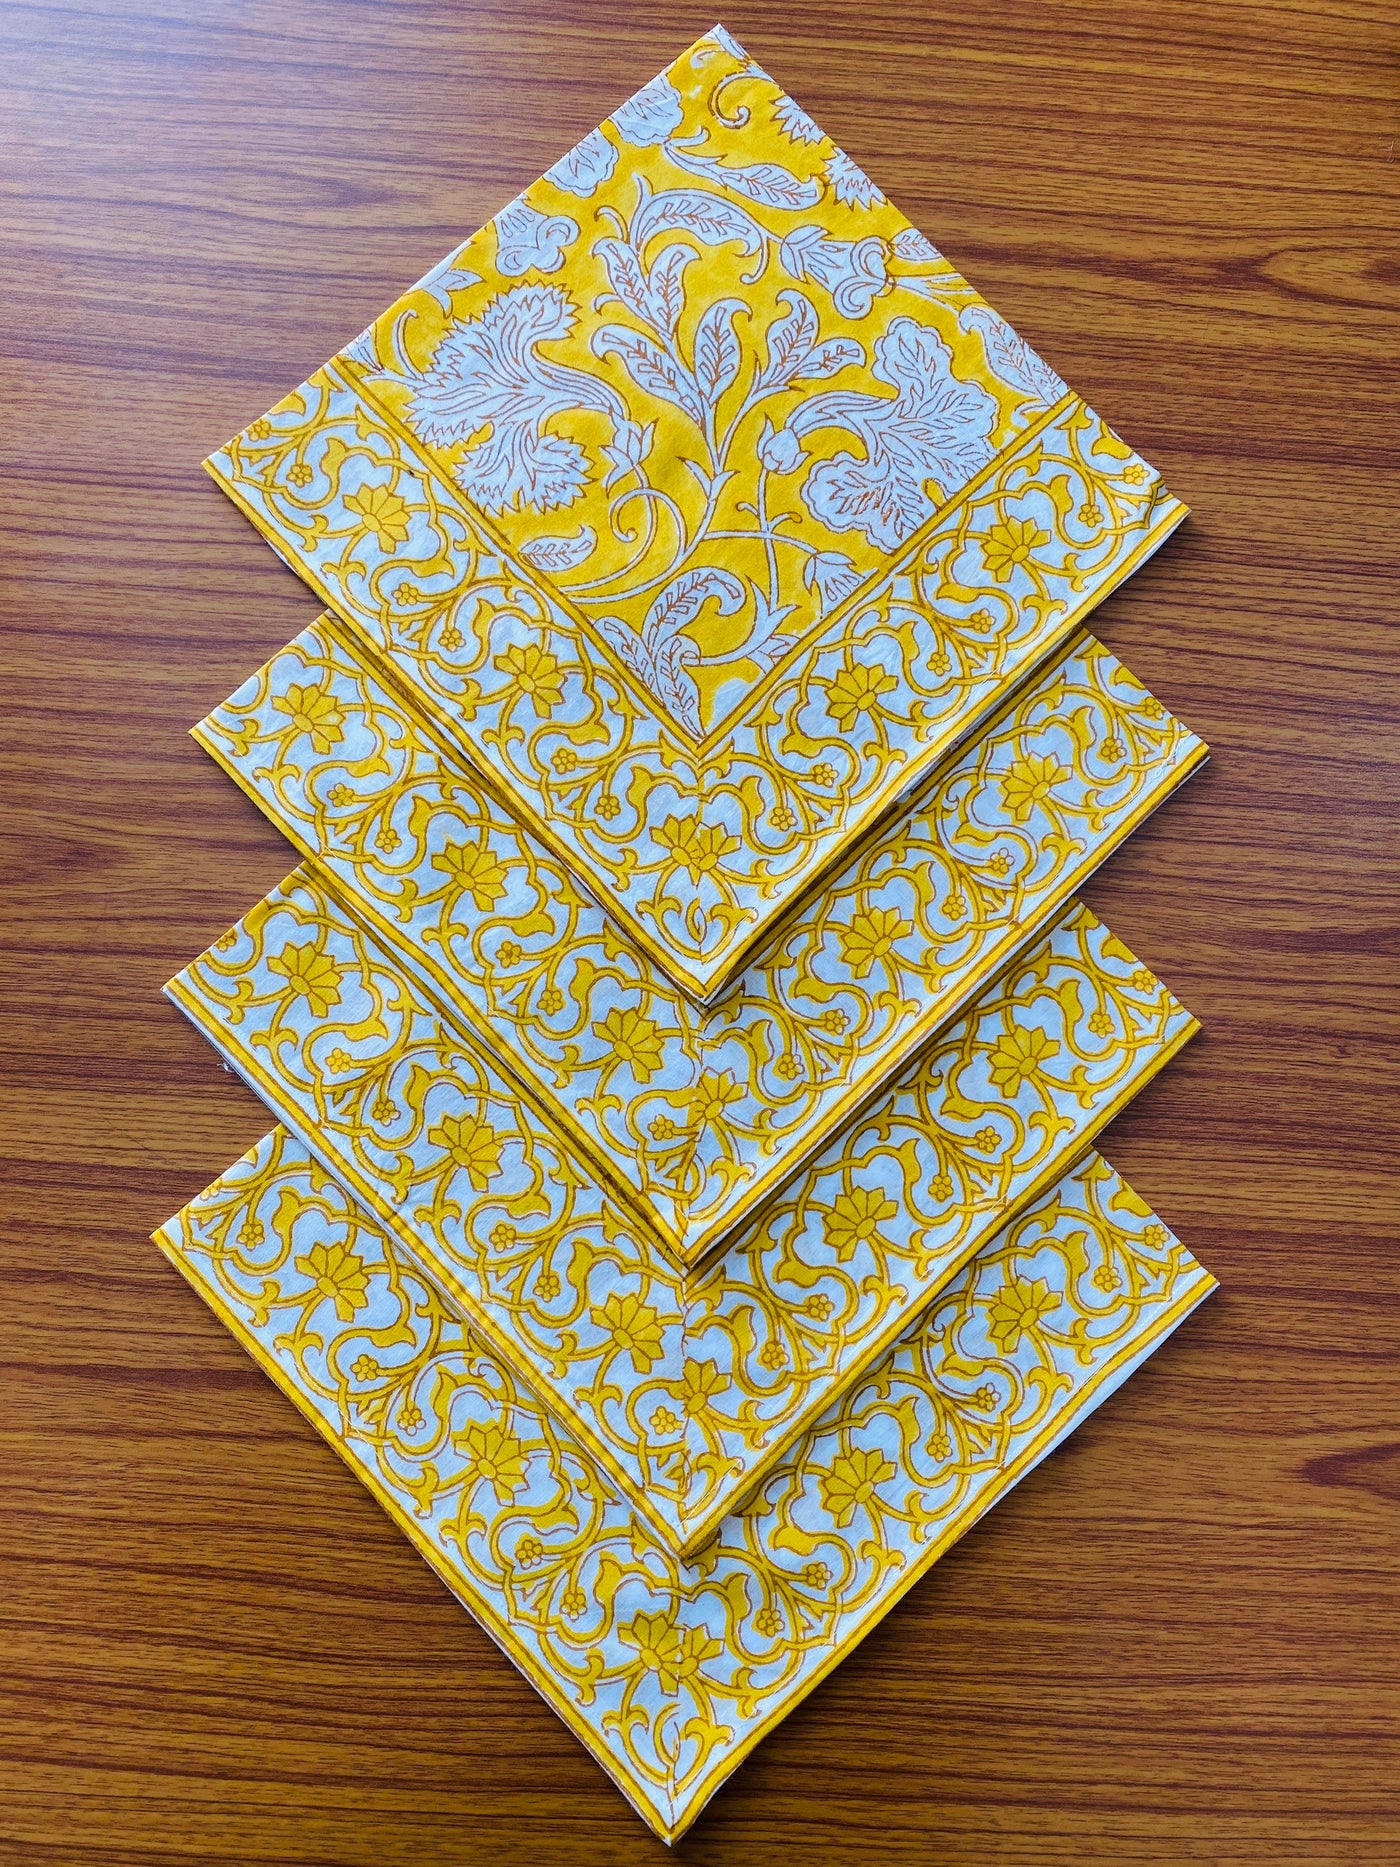 Fabricrush Saffron Yellow and Off White Indian Floral Hand Block Printed Border 100% Pure Cotton Cloth Napkins Size 20x20" Mother' Day